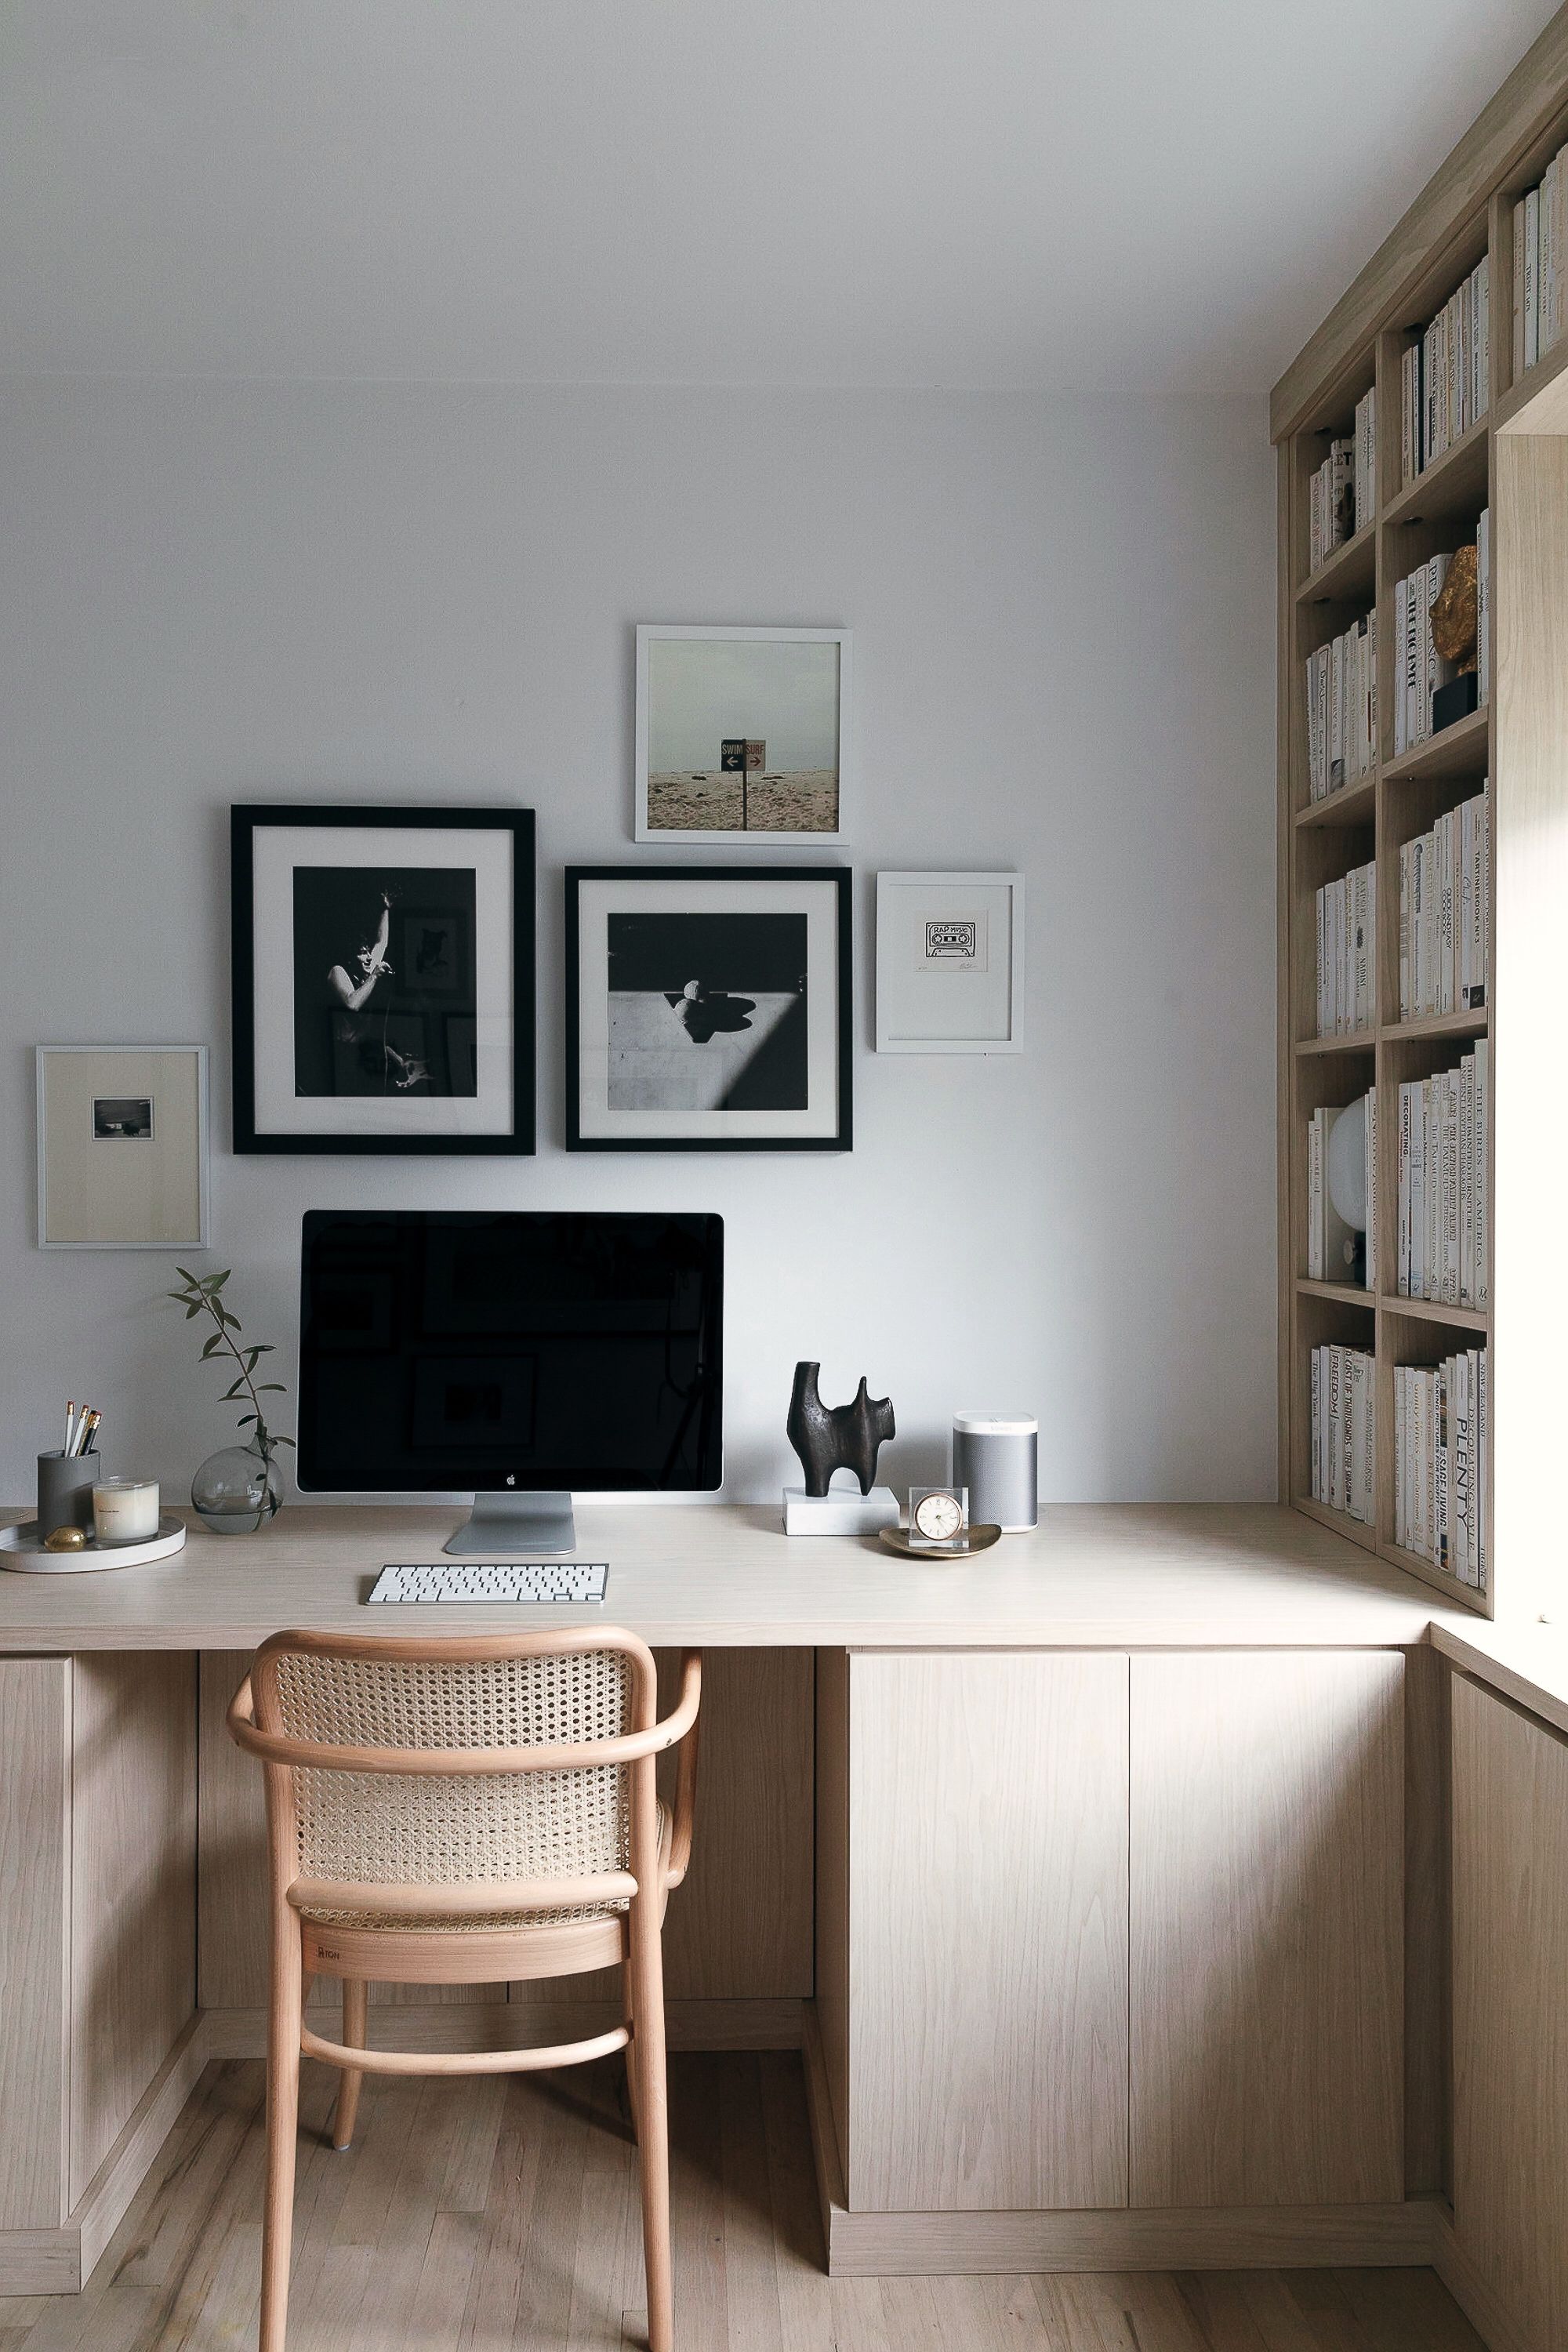 10 Hide your small home office at the end of the day